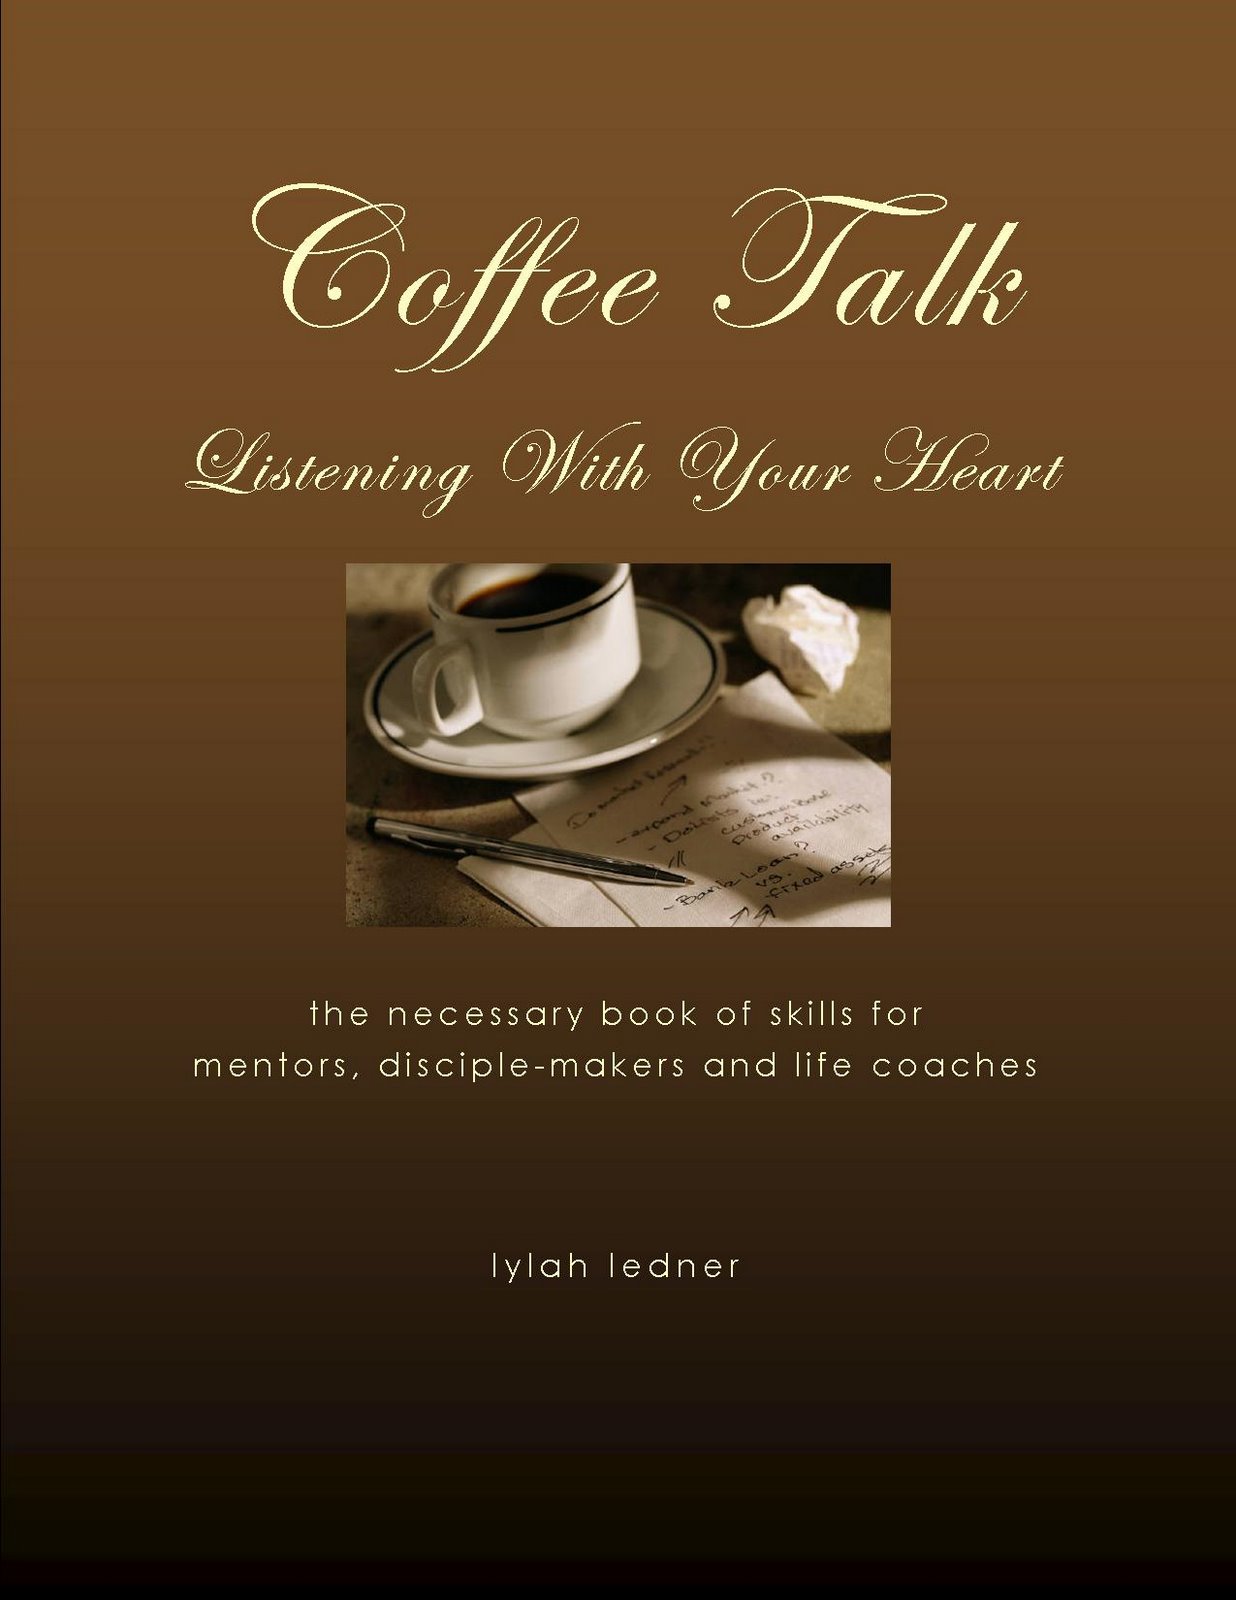 [e-Book+++Coffee+Talk+-+Listening+Skills+for+Mentors+and+Coaches.jpg]